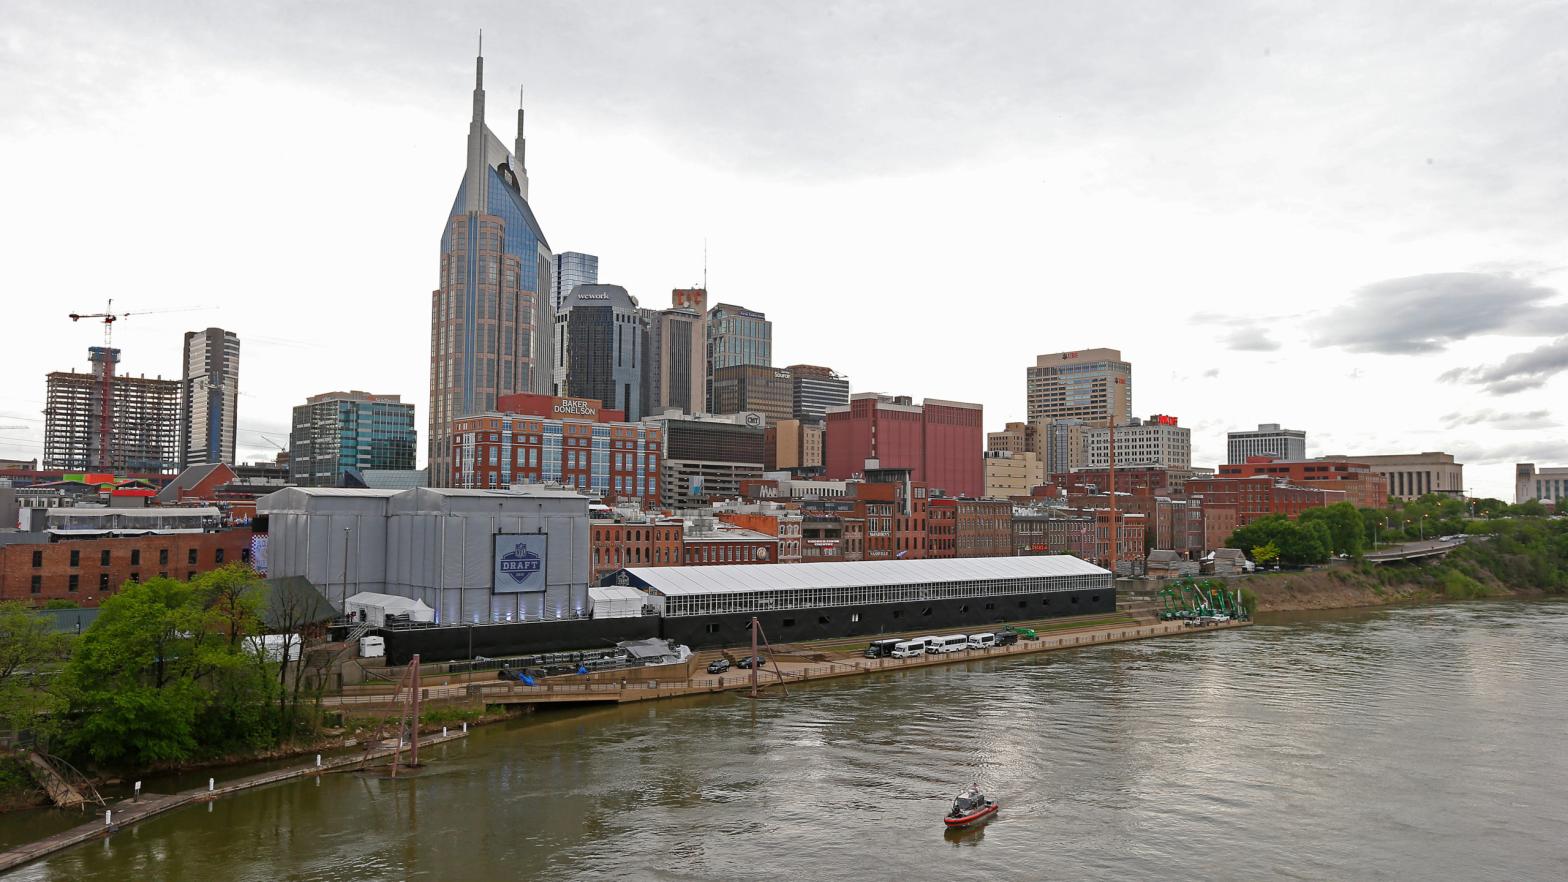 File photo of Nashville, Tennessee. (Photo: Frederick Breedon, Getty Images)